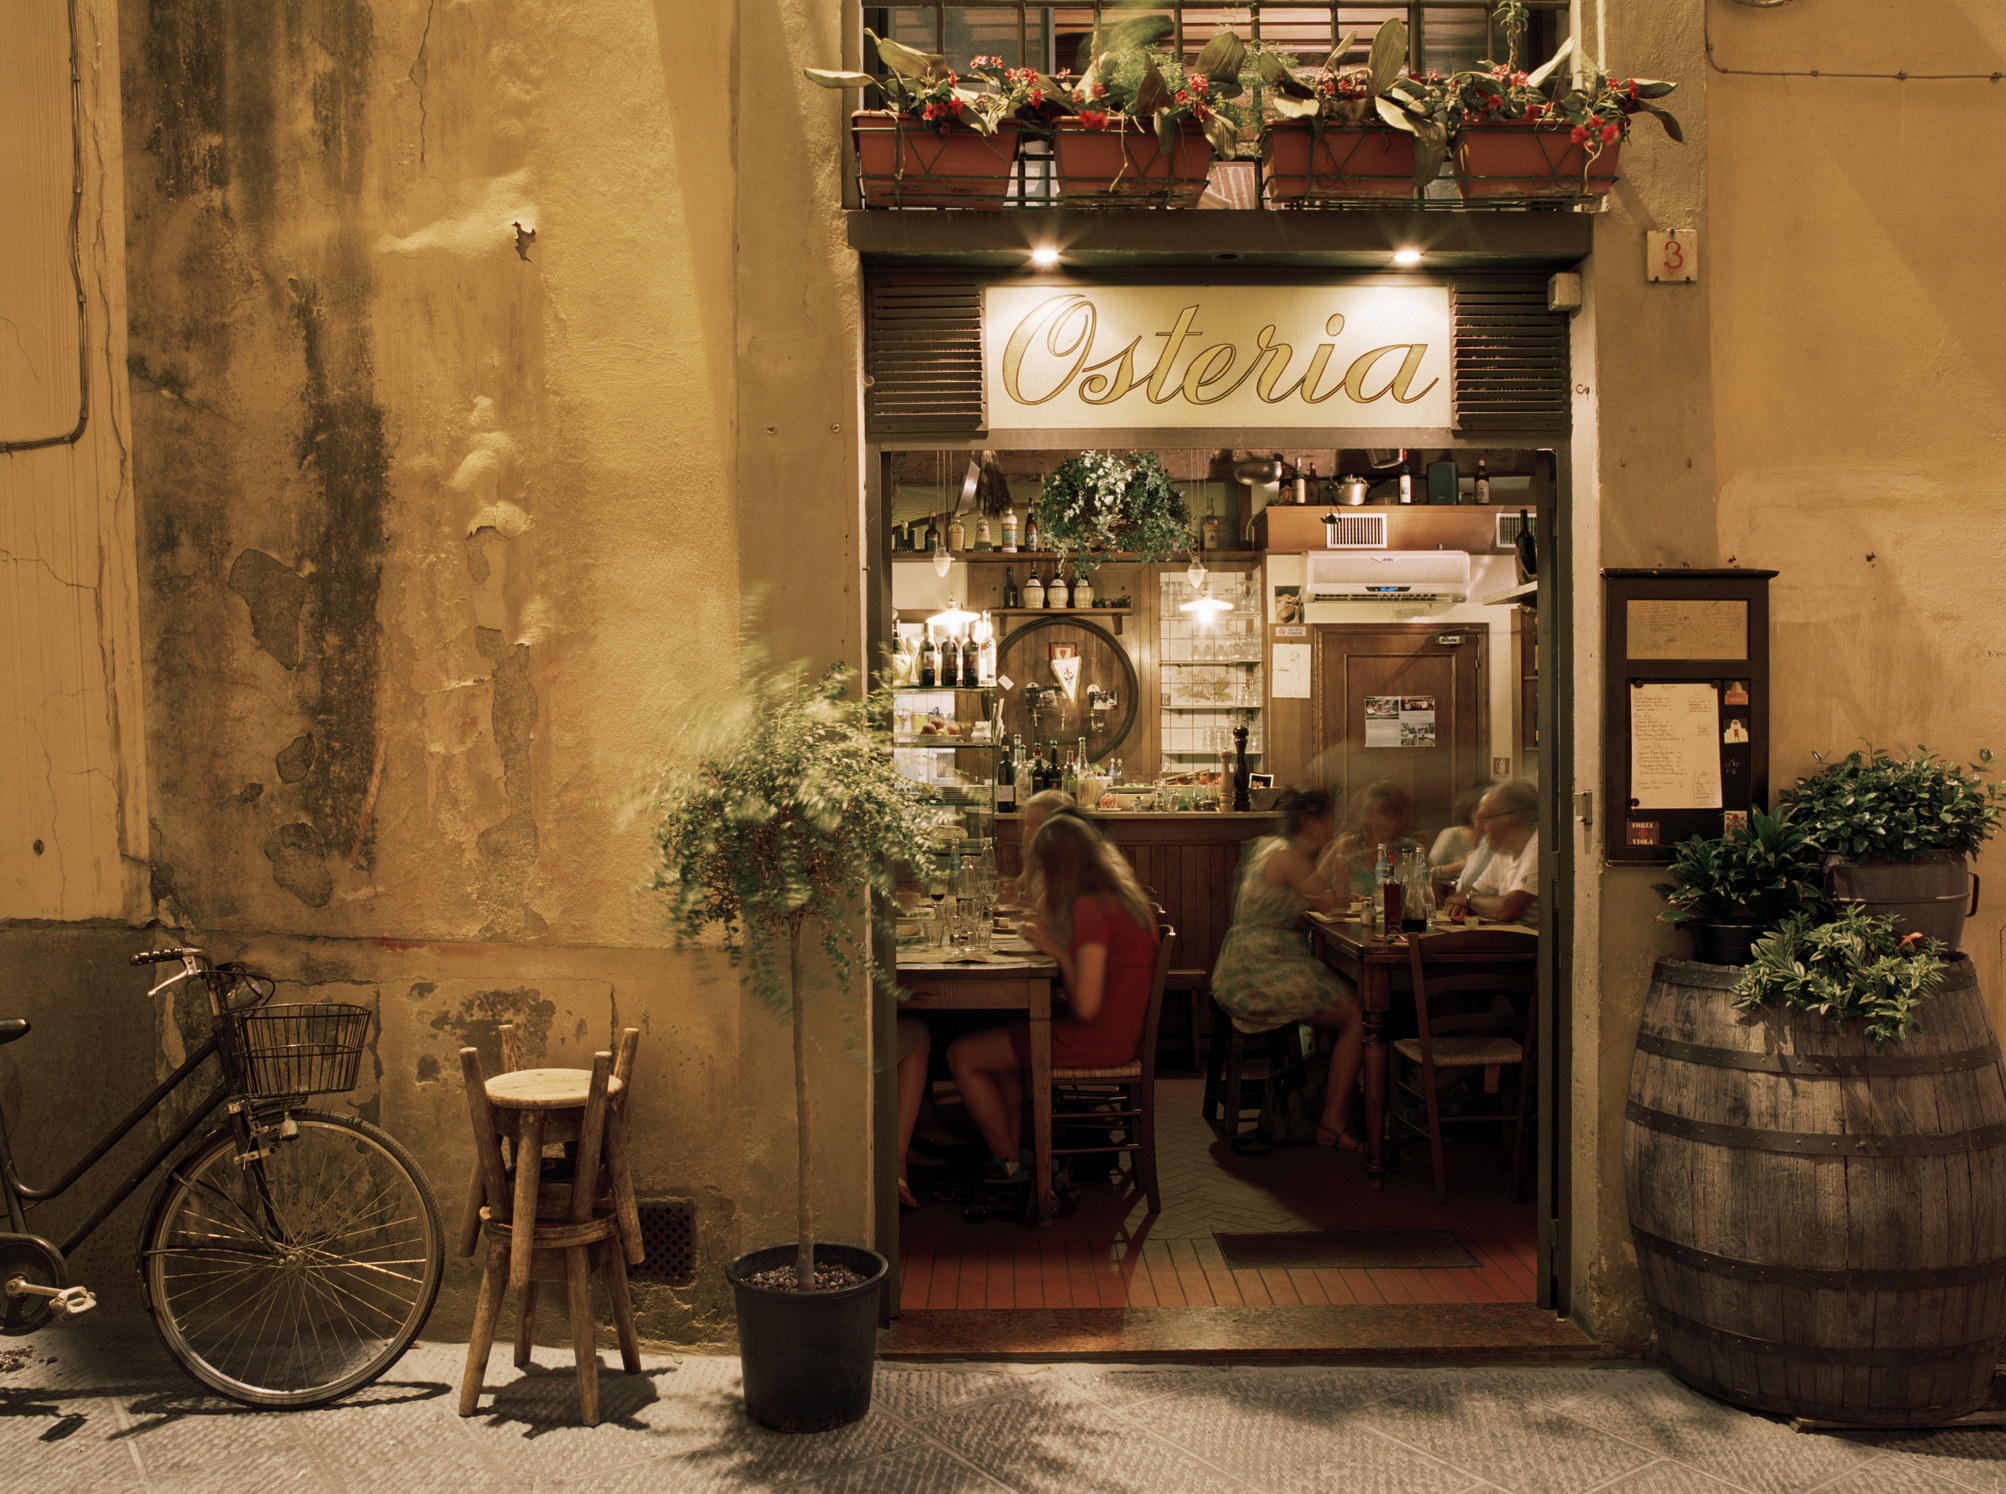 People dining inside an osteria